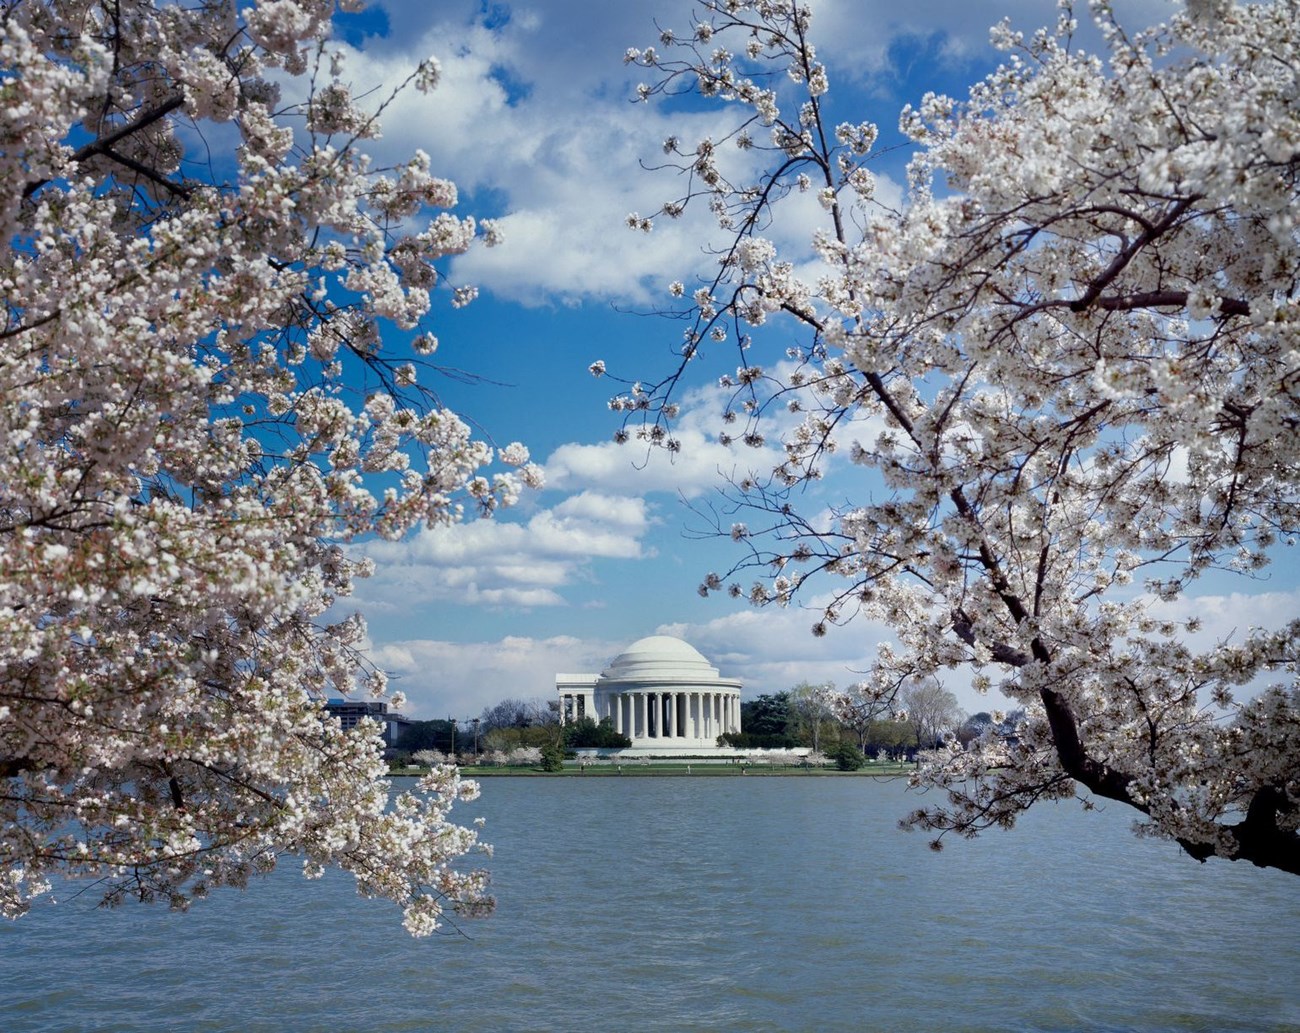 The Jefferson Memorial and waters of the Tidal Basin framed by blooming cherry trees